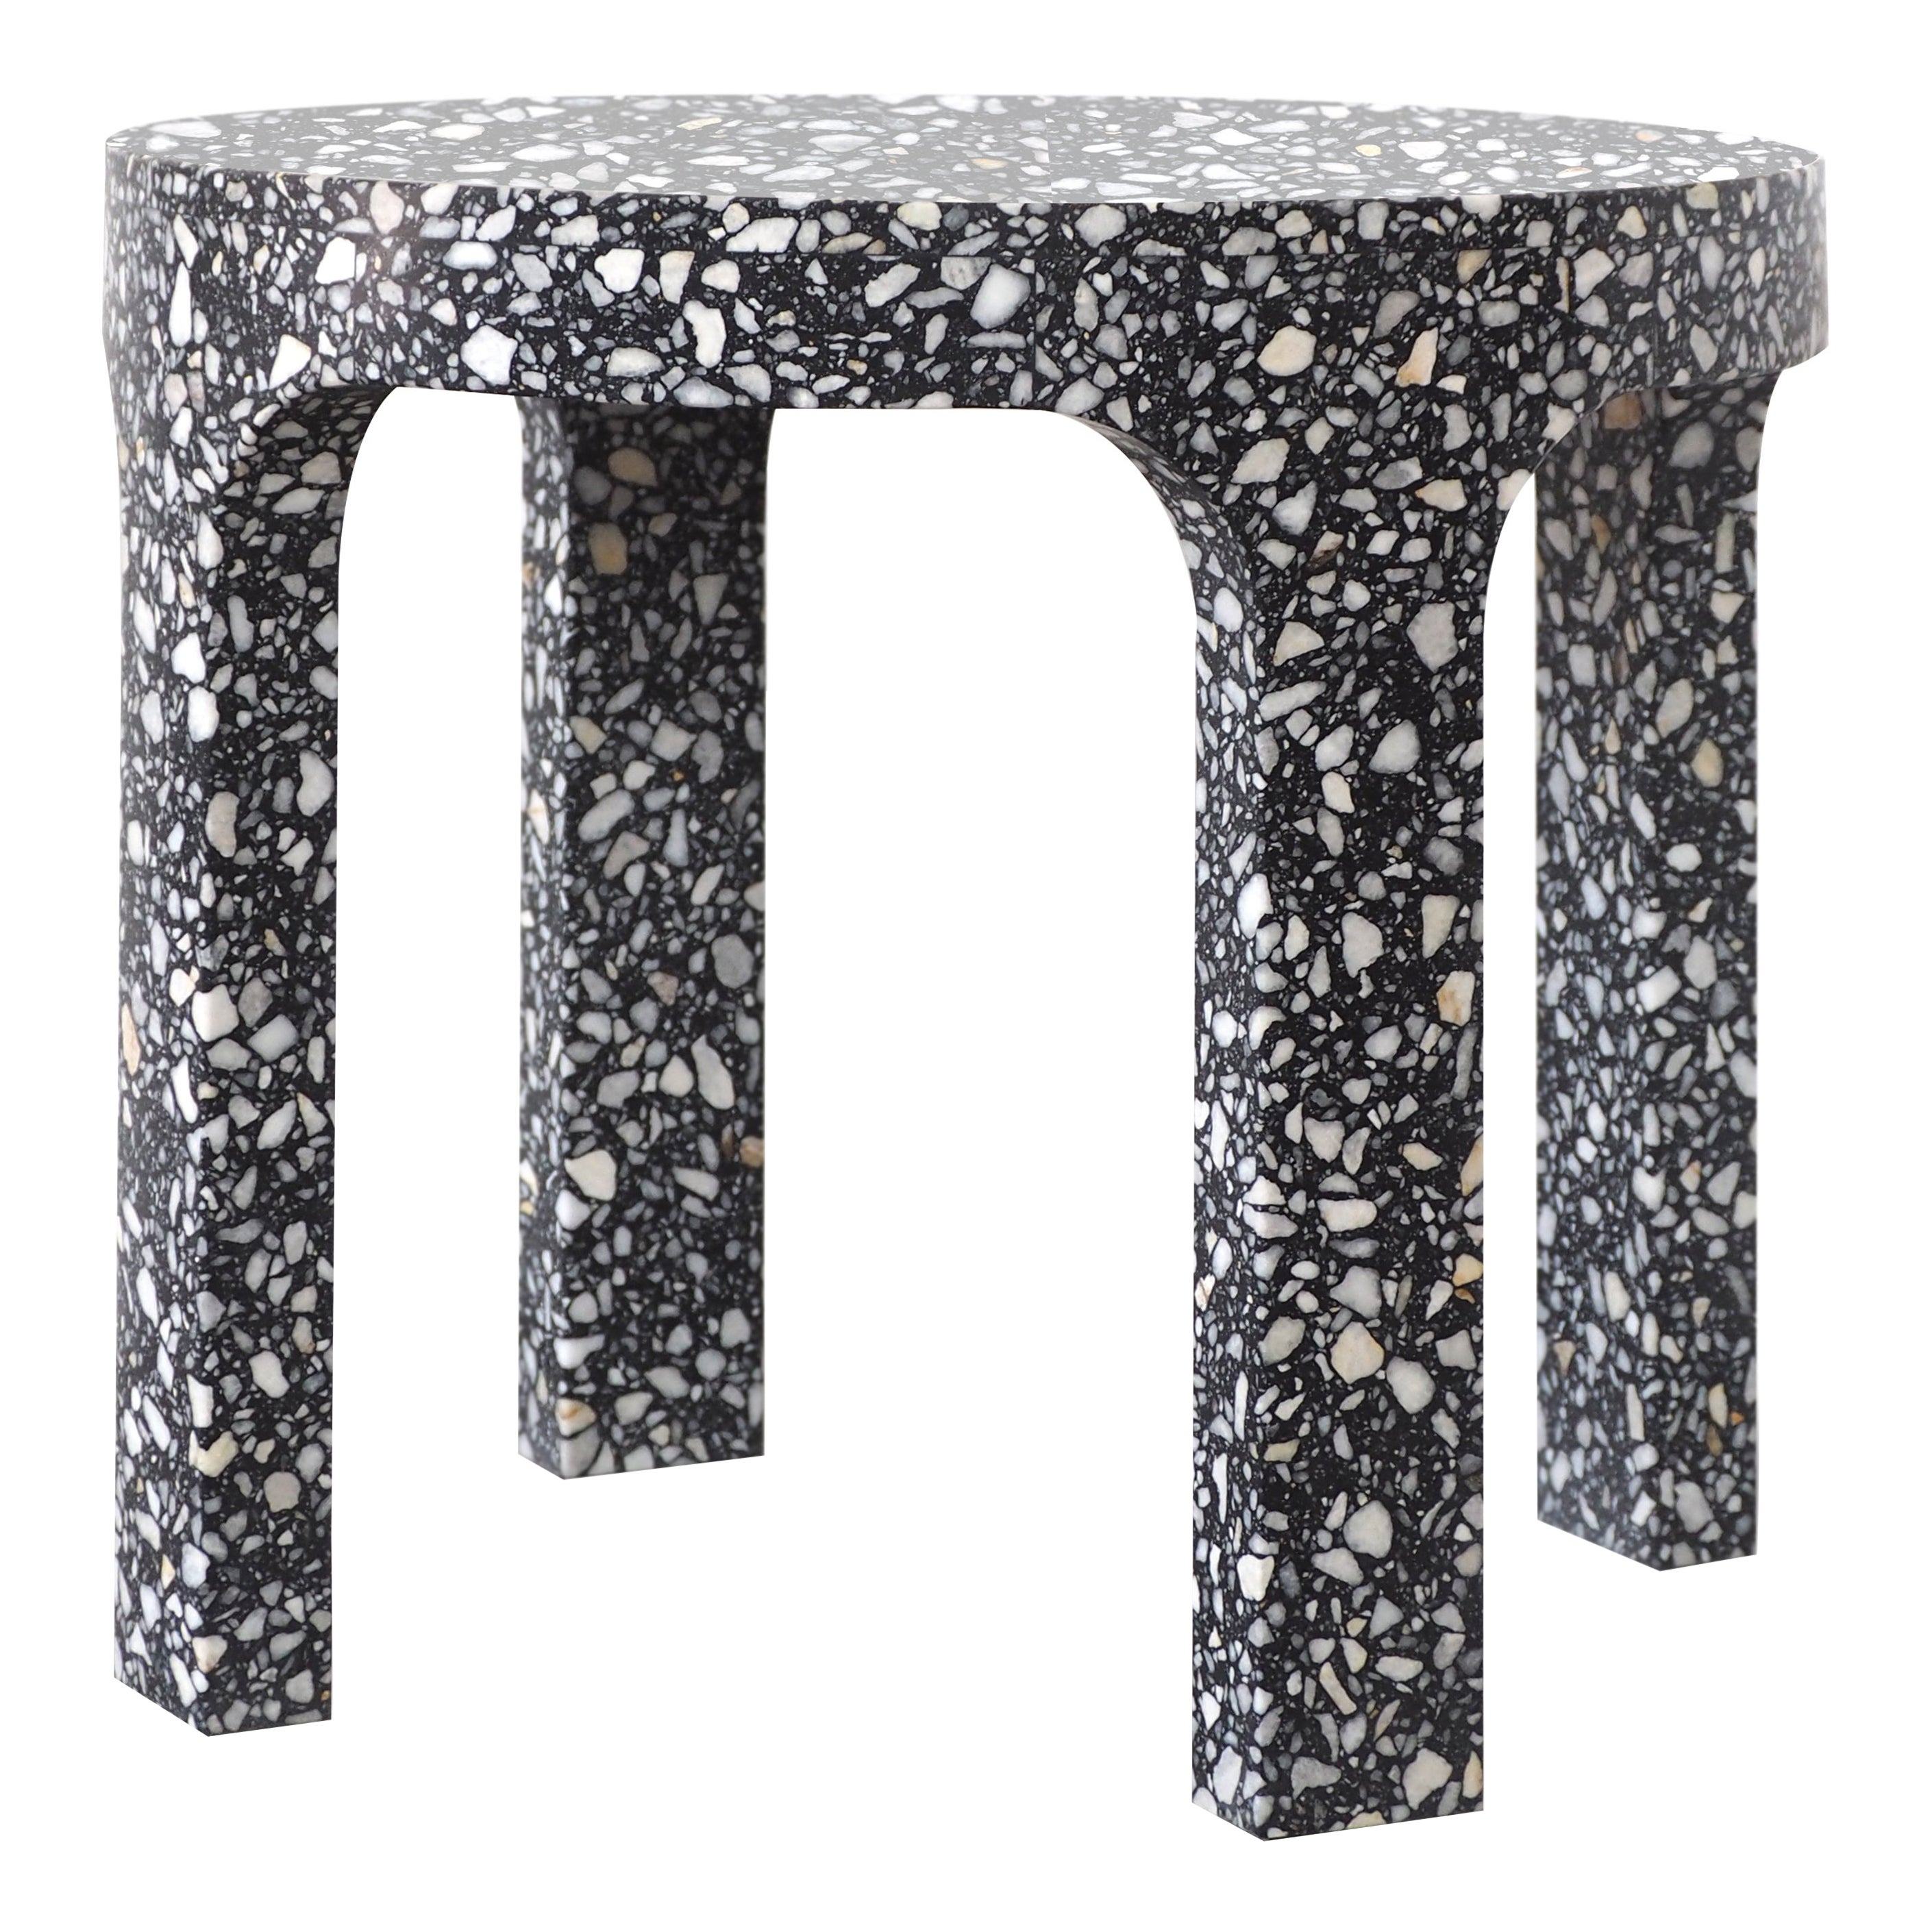 Loggia Large Round Table or Black Terrazzo Marble by Portego